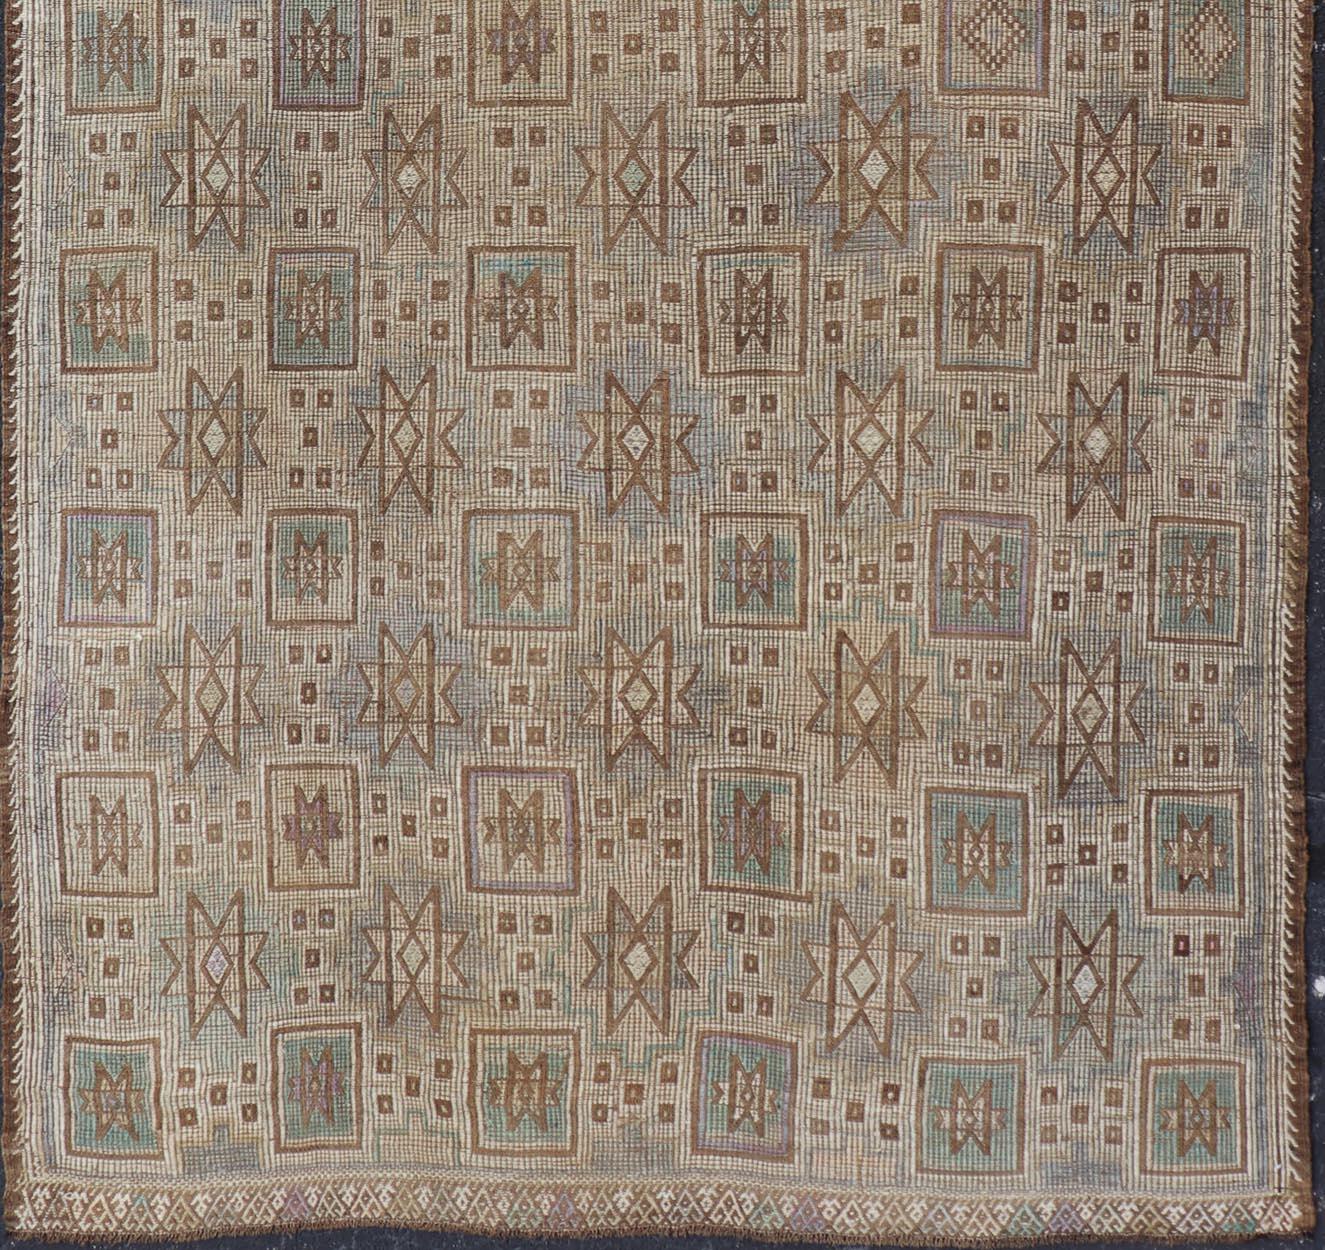 Measures: 5'0 x 9'8 

This vintage flat weave Kilim was hand woven in Turkey during the 1950's. The light taupe field is decorated with tribal-like motifs, with light teal, lavender and mocha color palette. 

Country of origin: Turkey; type: